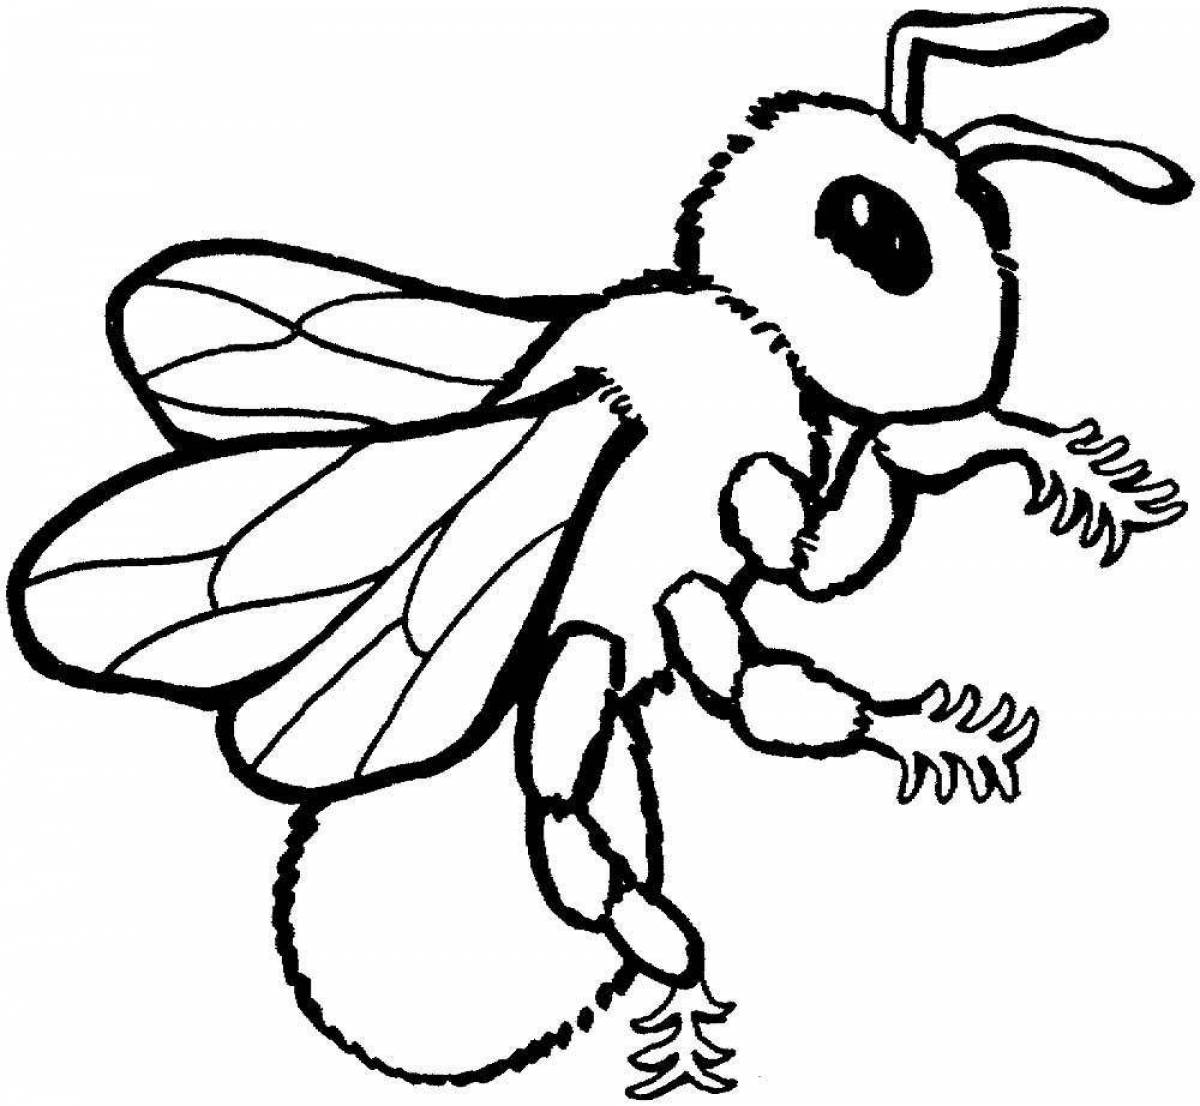 Fun wasp coloring book for kids